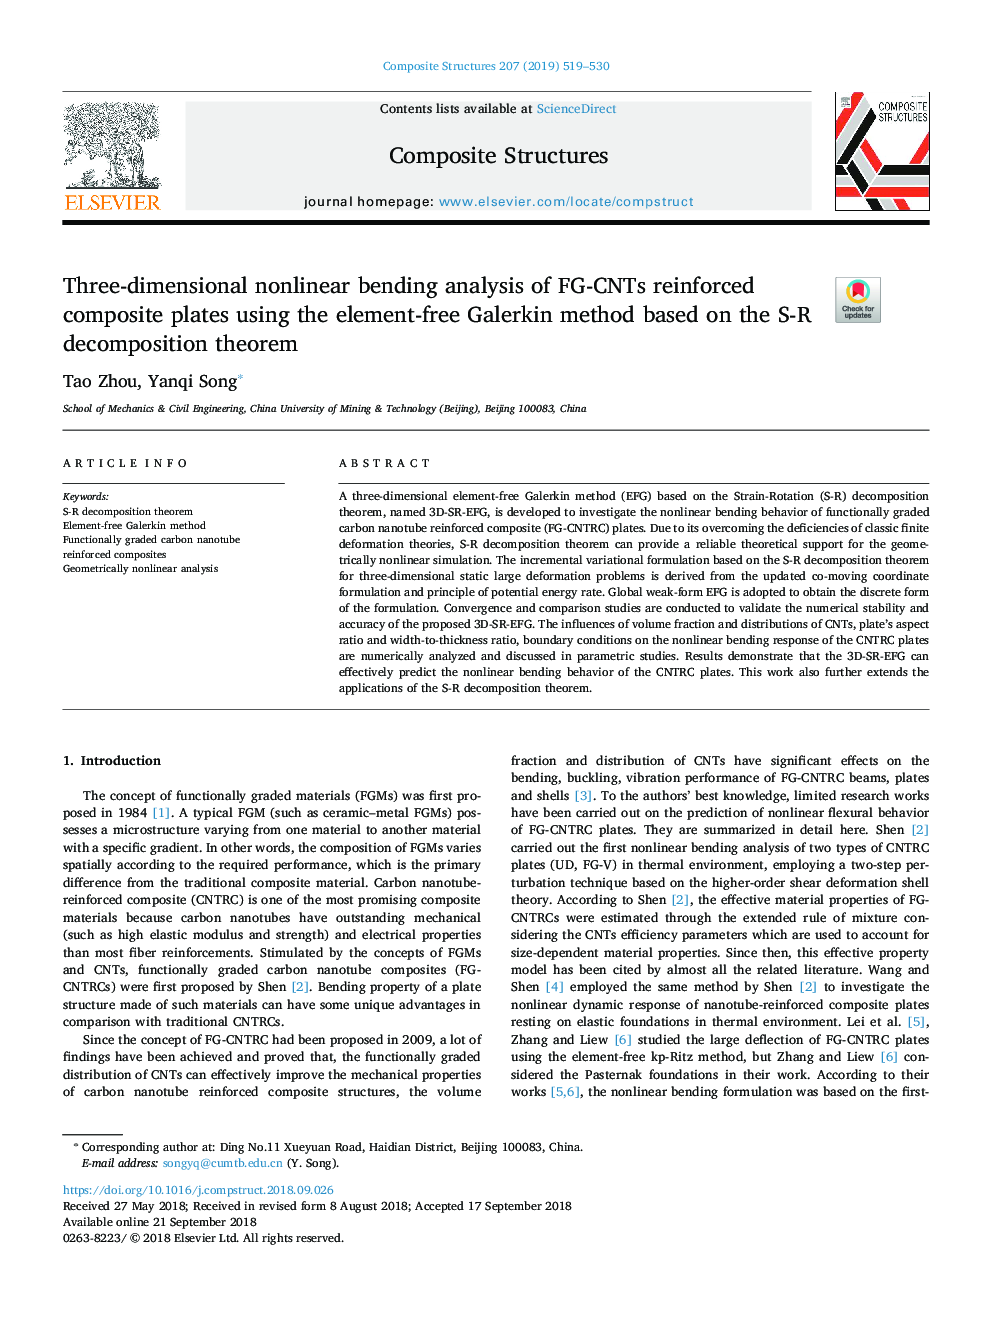 Three-dimensional nonlinear bending analysis of FG-CNTs reinforced composite plates using the element-free Galerkin method based on the S-R decomposition theorem